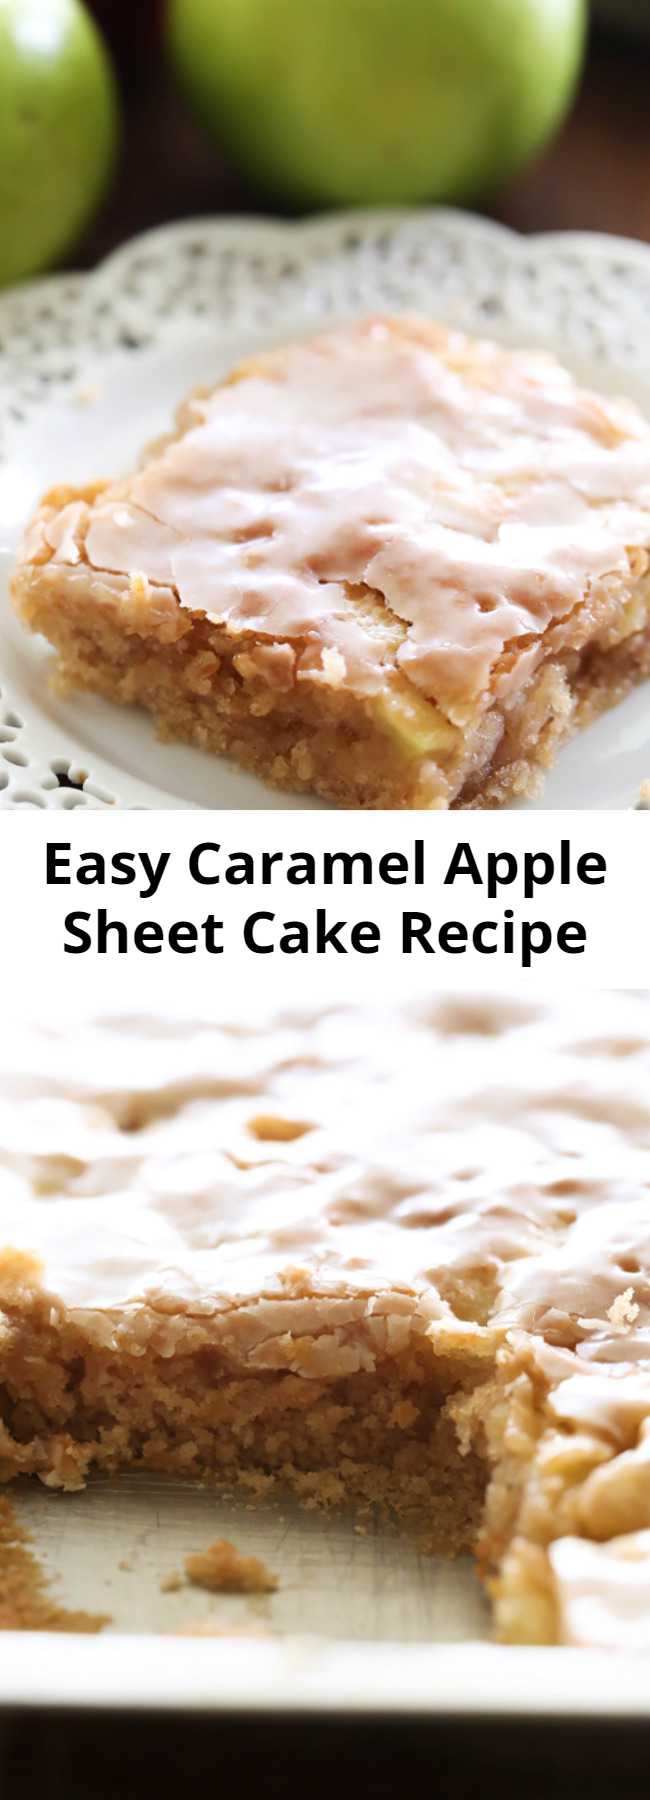 Moist Caramel Apple Sheet Cake Recipe - This delicious apple cake is perfectly moist and has caramel frosting infused in each and every bite! It is heavenly!